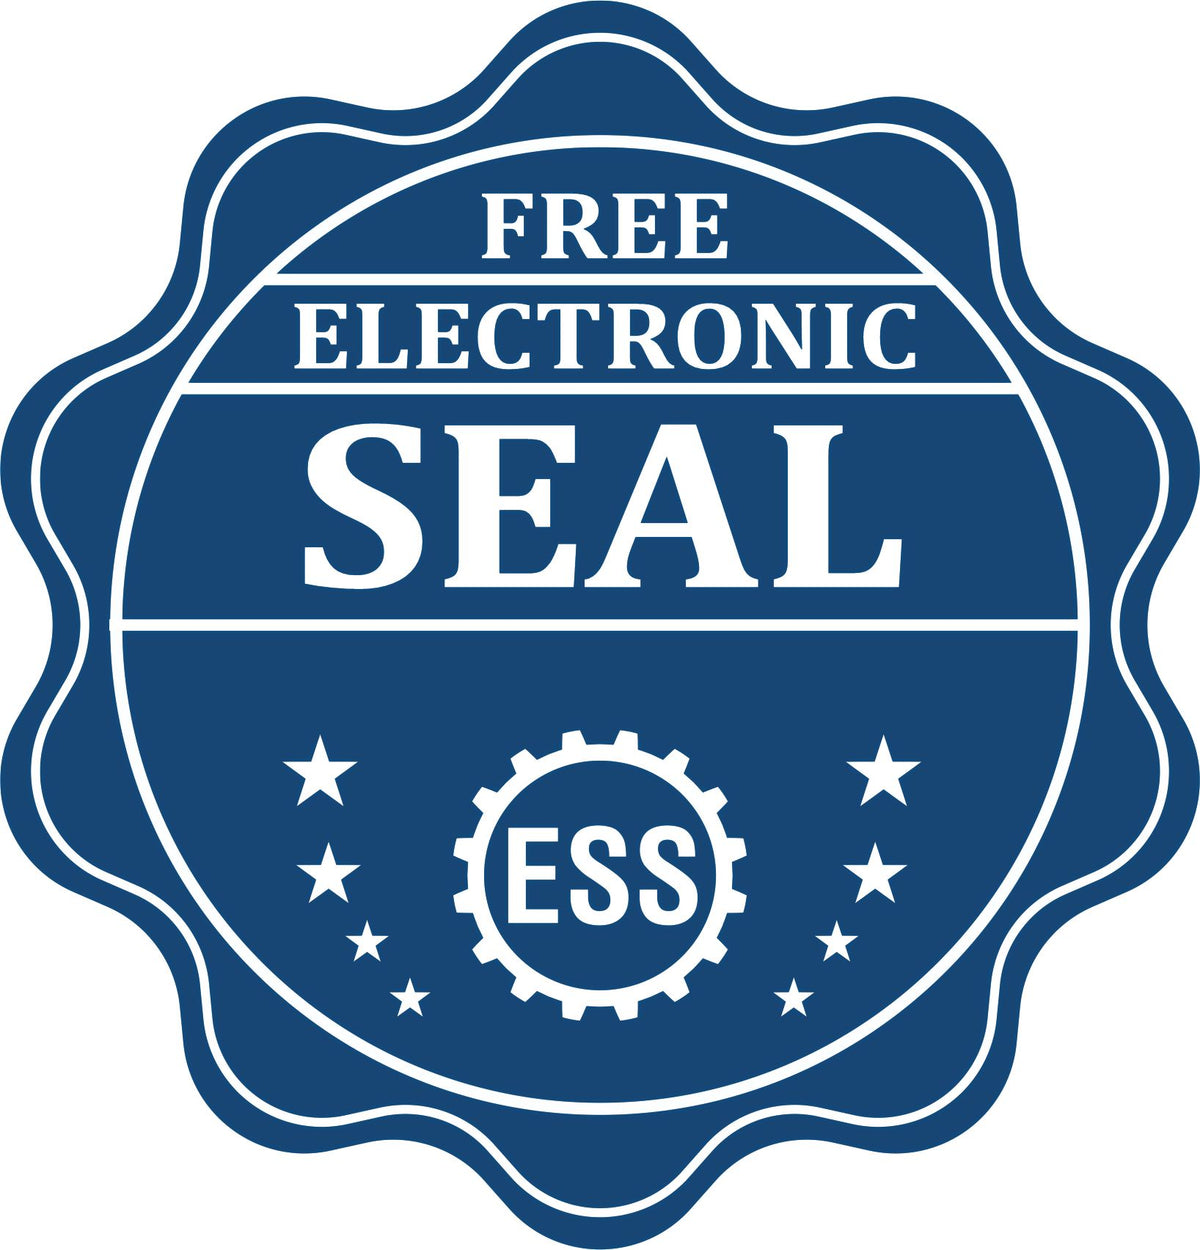 A badge showing a free electronic seal for the Handheld District of Columbia Land Surveyor Seal with stars and the ESS gear on the emblem.